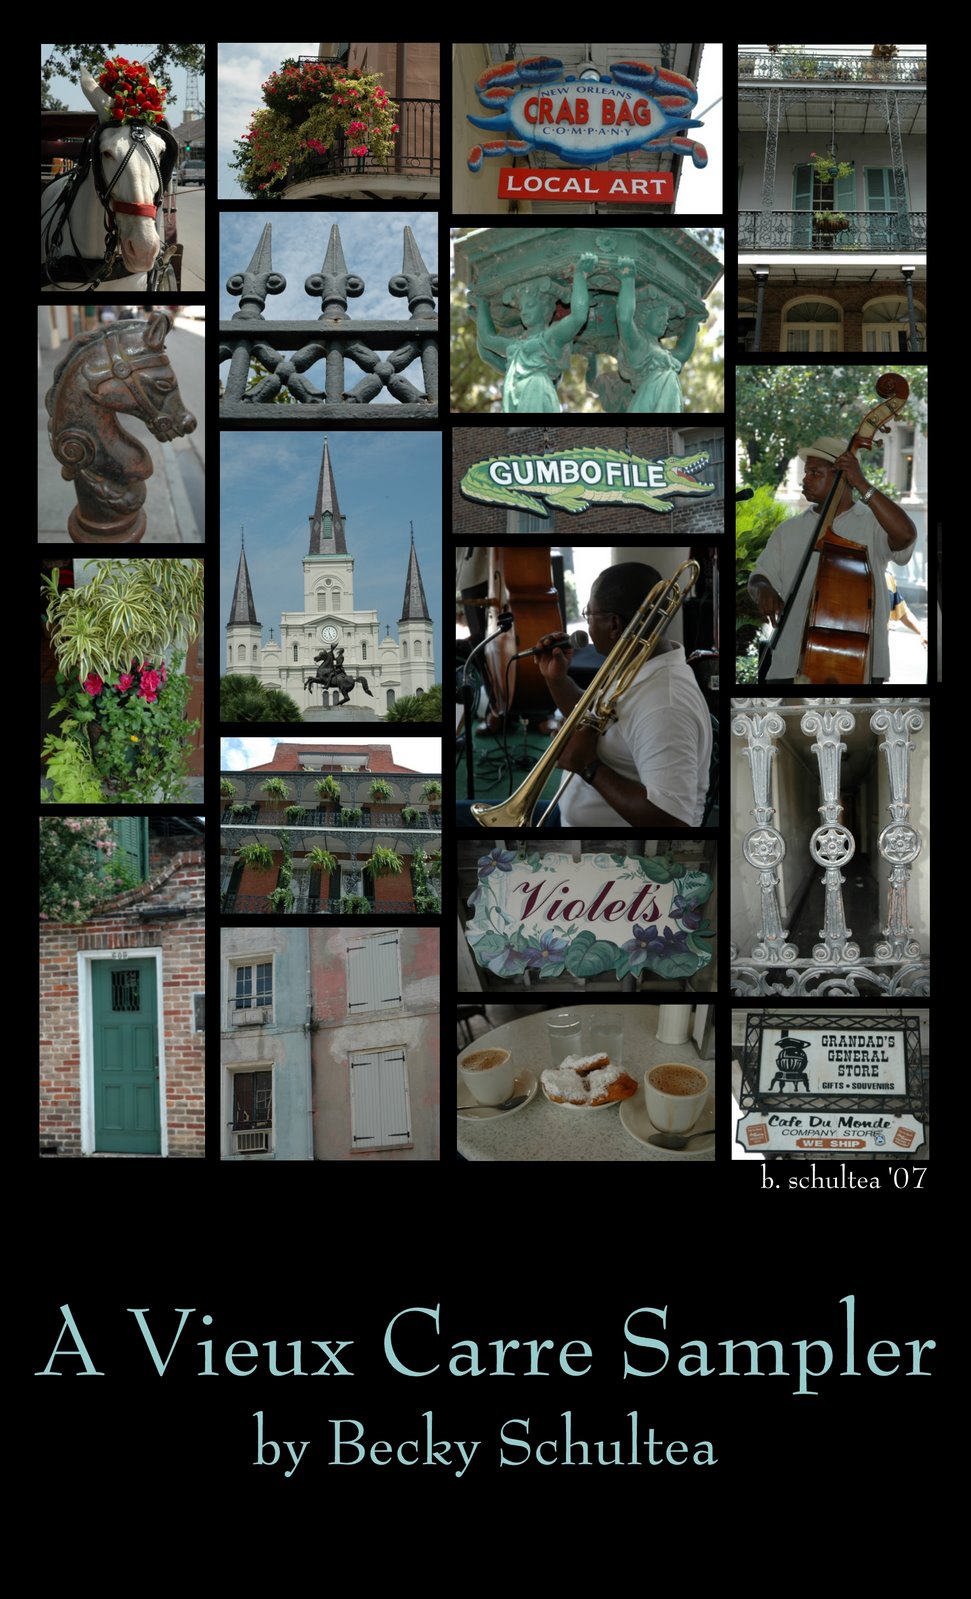 [New+Orleans+Montage+Poster.jpg]